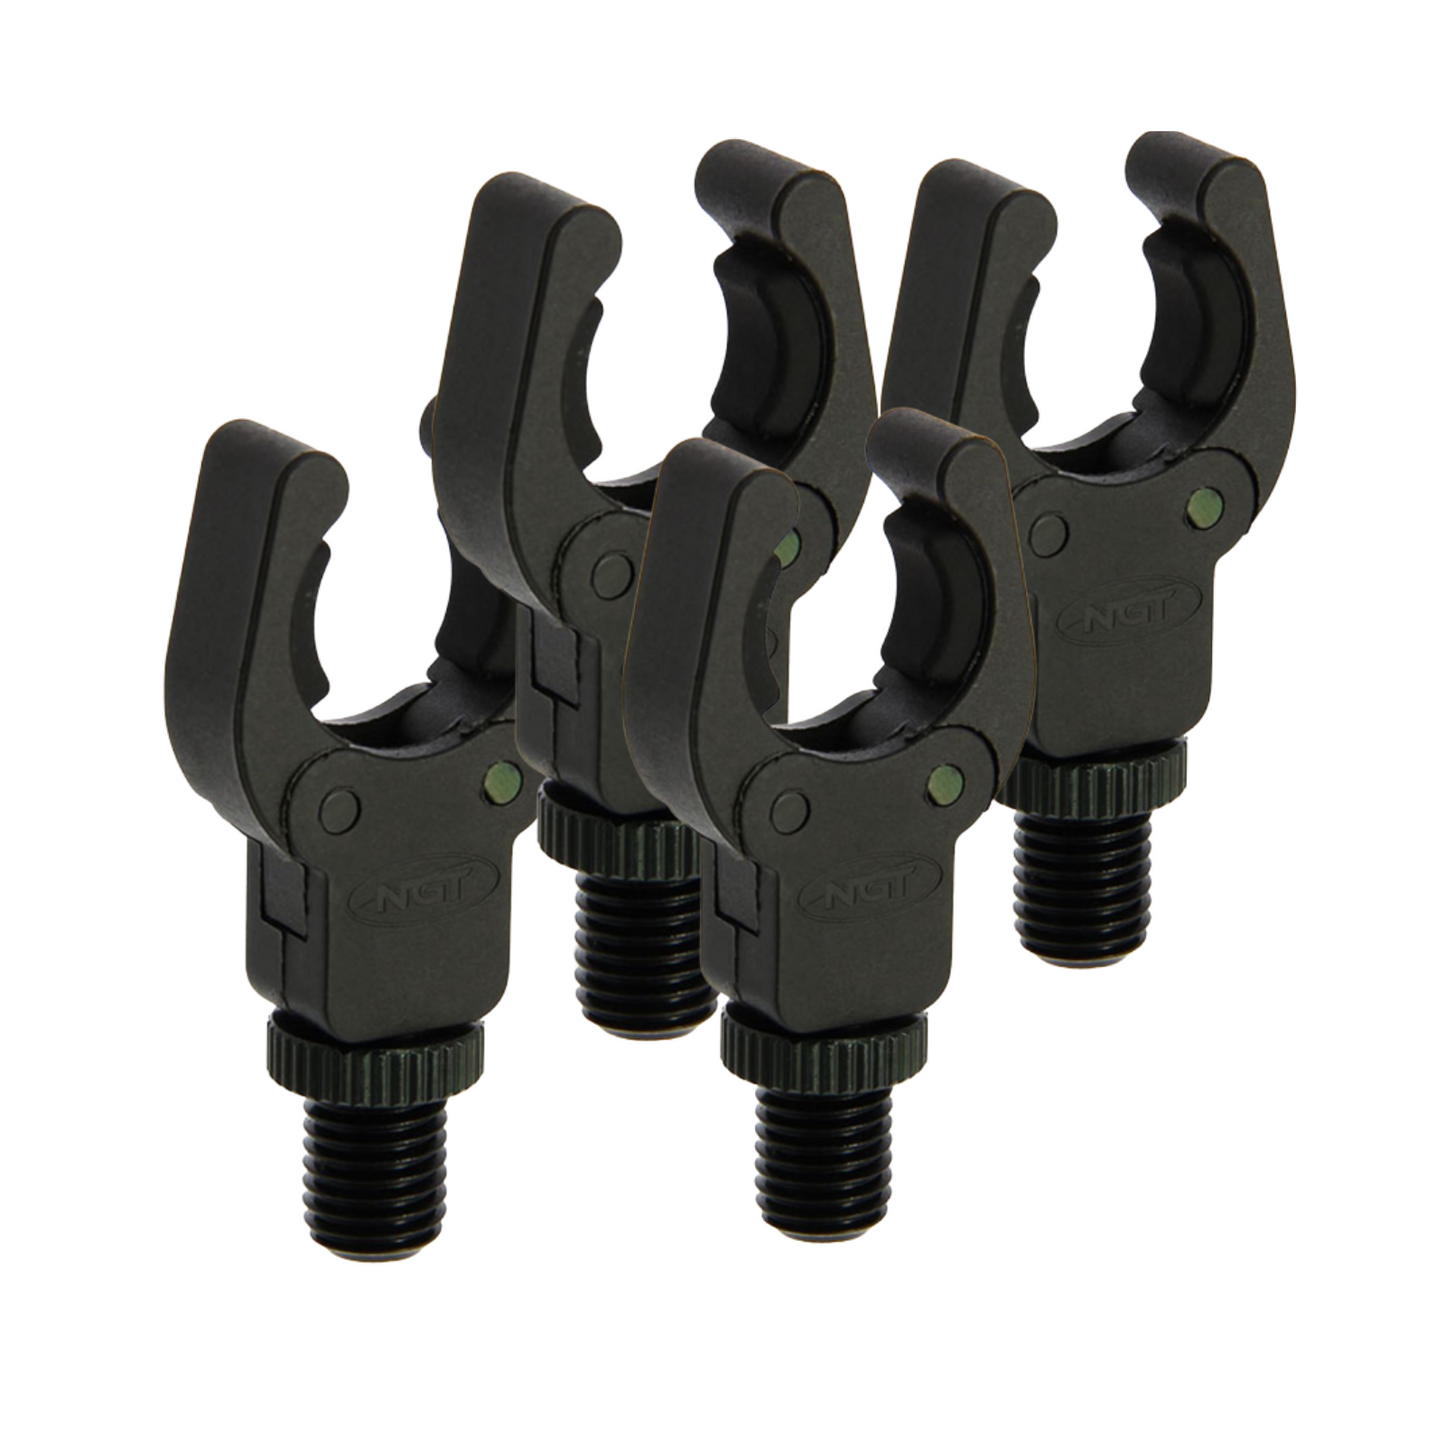 NGT GRIPZ - SPRING LOADED SECURE BUTT REST - VARIOUS QUANTITIES